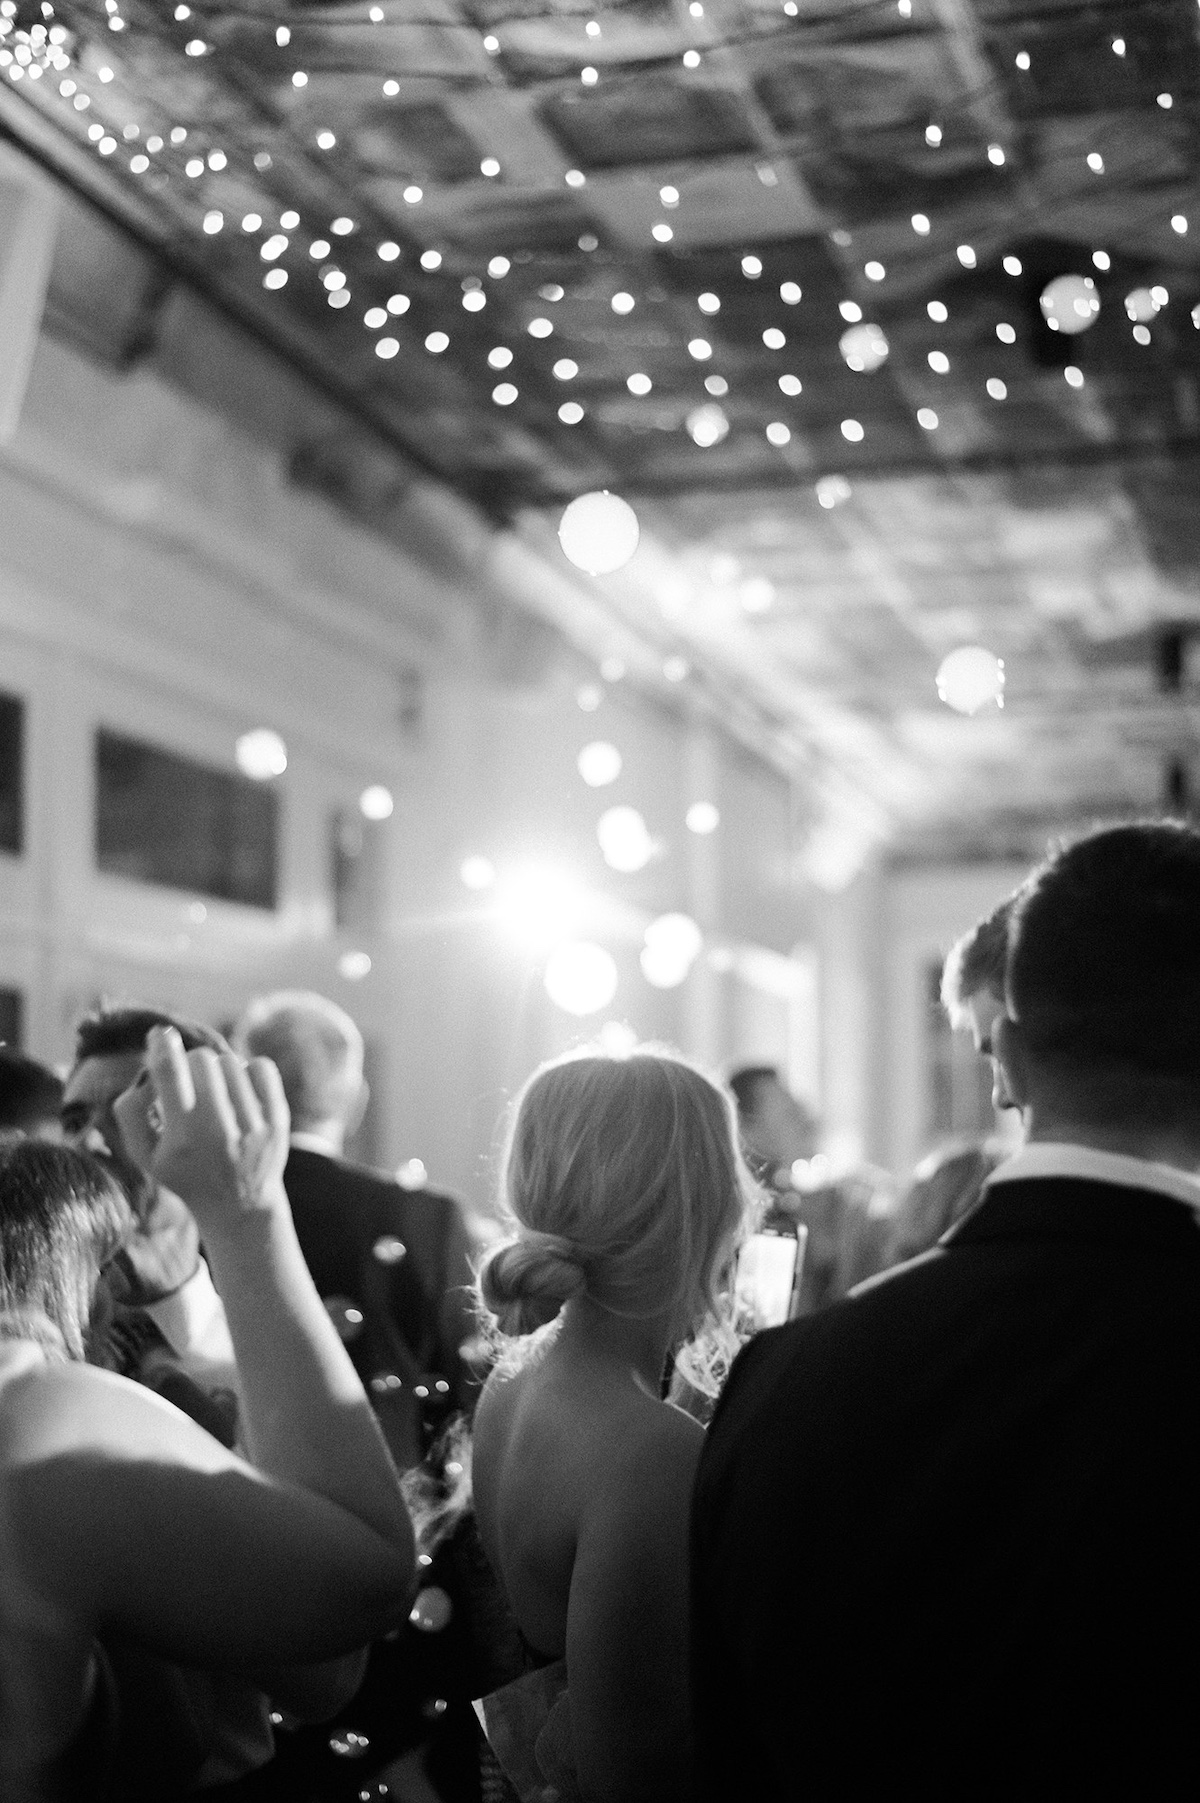 Elegance in motion as guests dance the night away, creating a vibrant and celebratory atmosphere at Kelly and Adam's wedding reception.